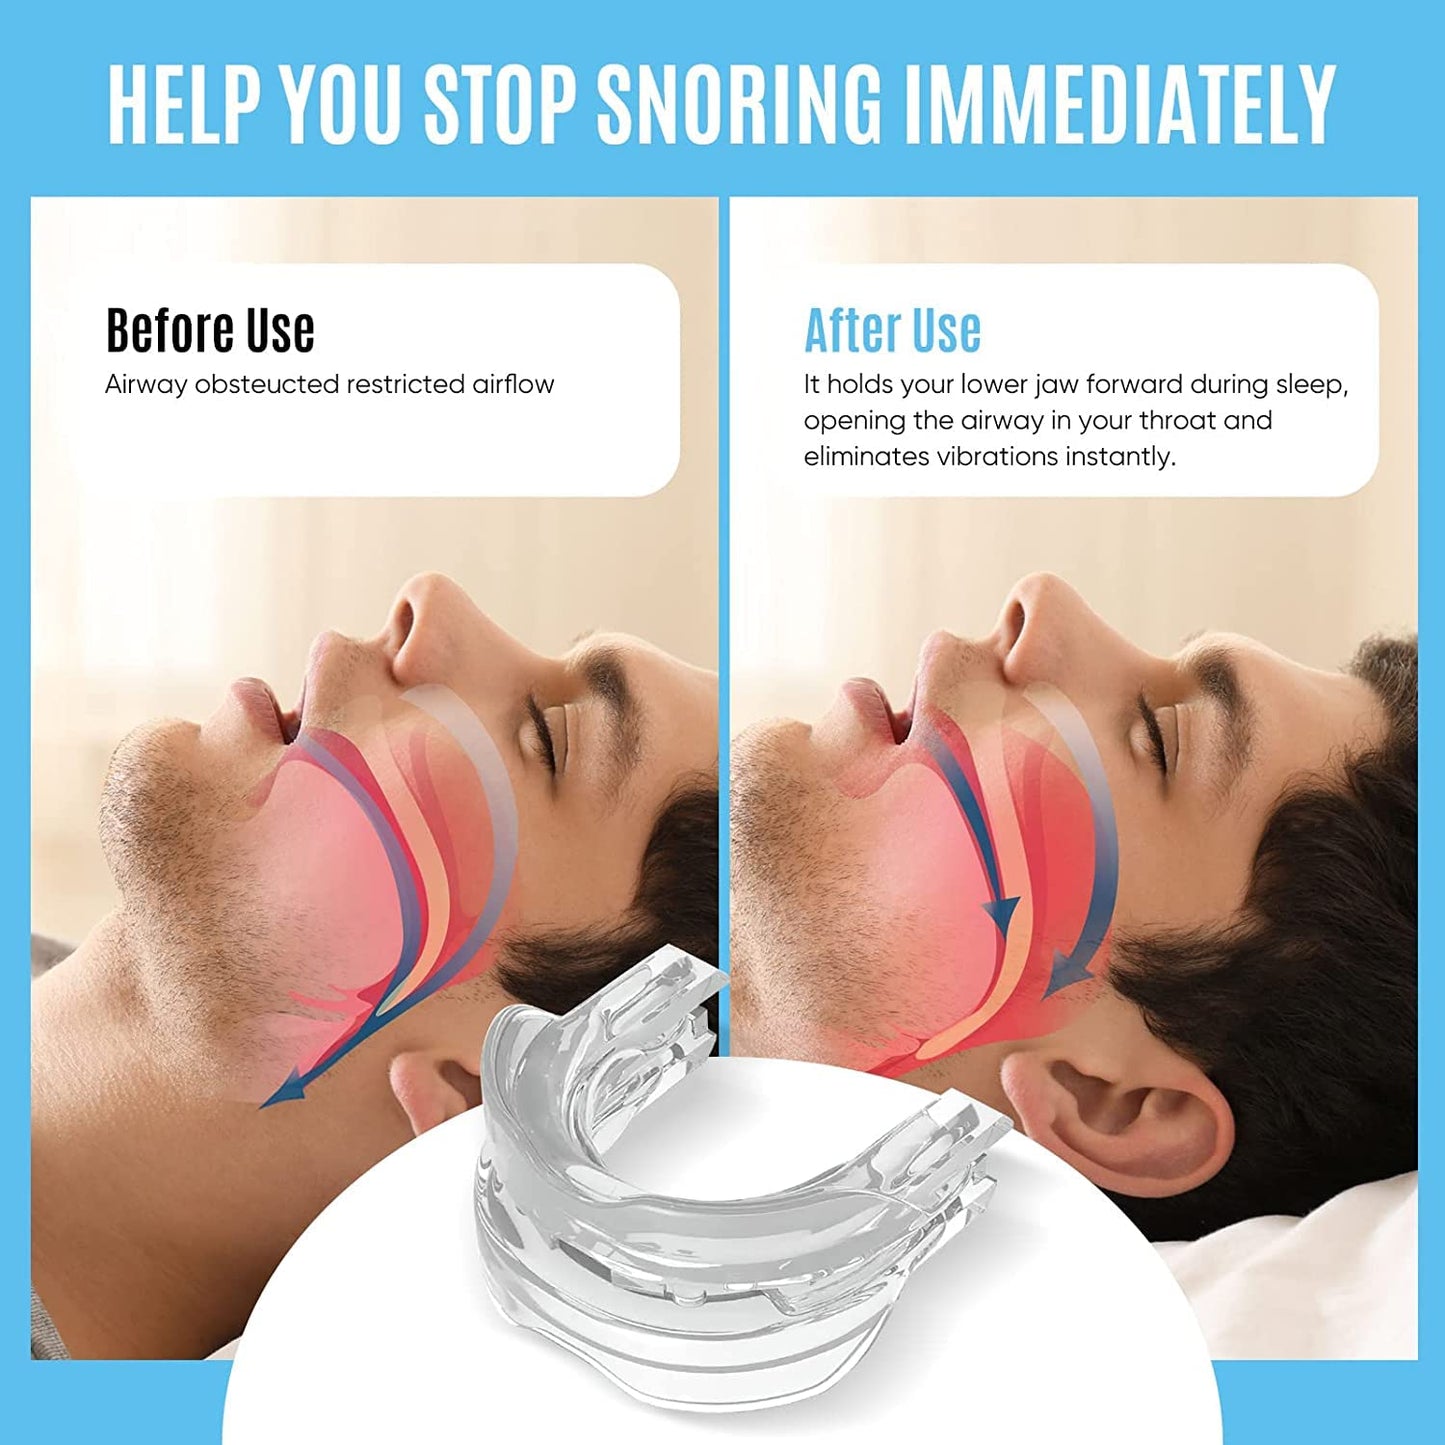 Stop Snoring Mask, Stop Snoring Device, Help Stop Snoring, Reduce Snoring Solution, Comfortable, Adjustable, Suitable for Men/Women. Allow people to get a good and restful night's sleep.